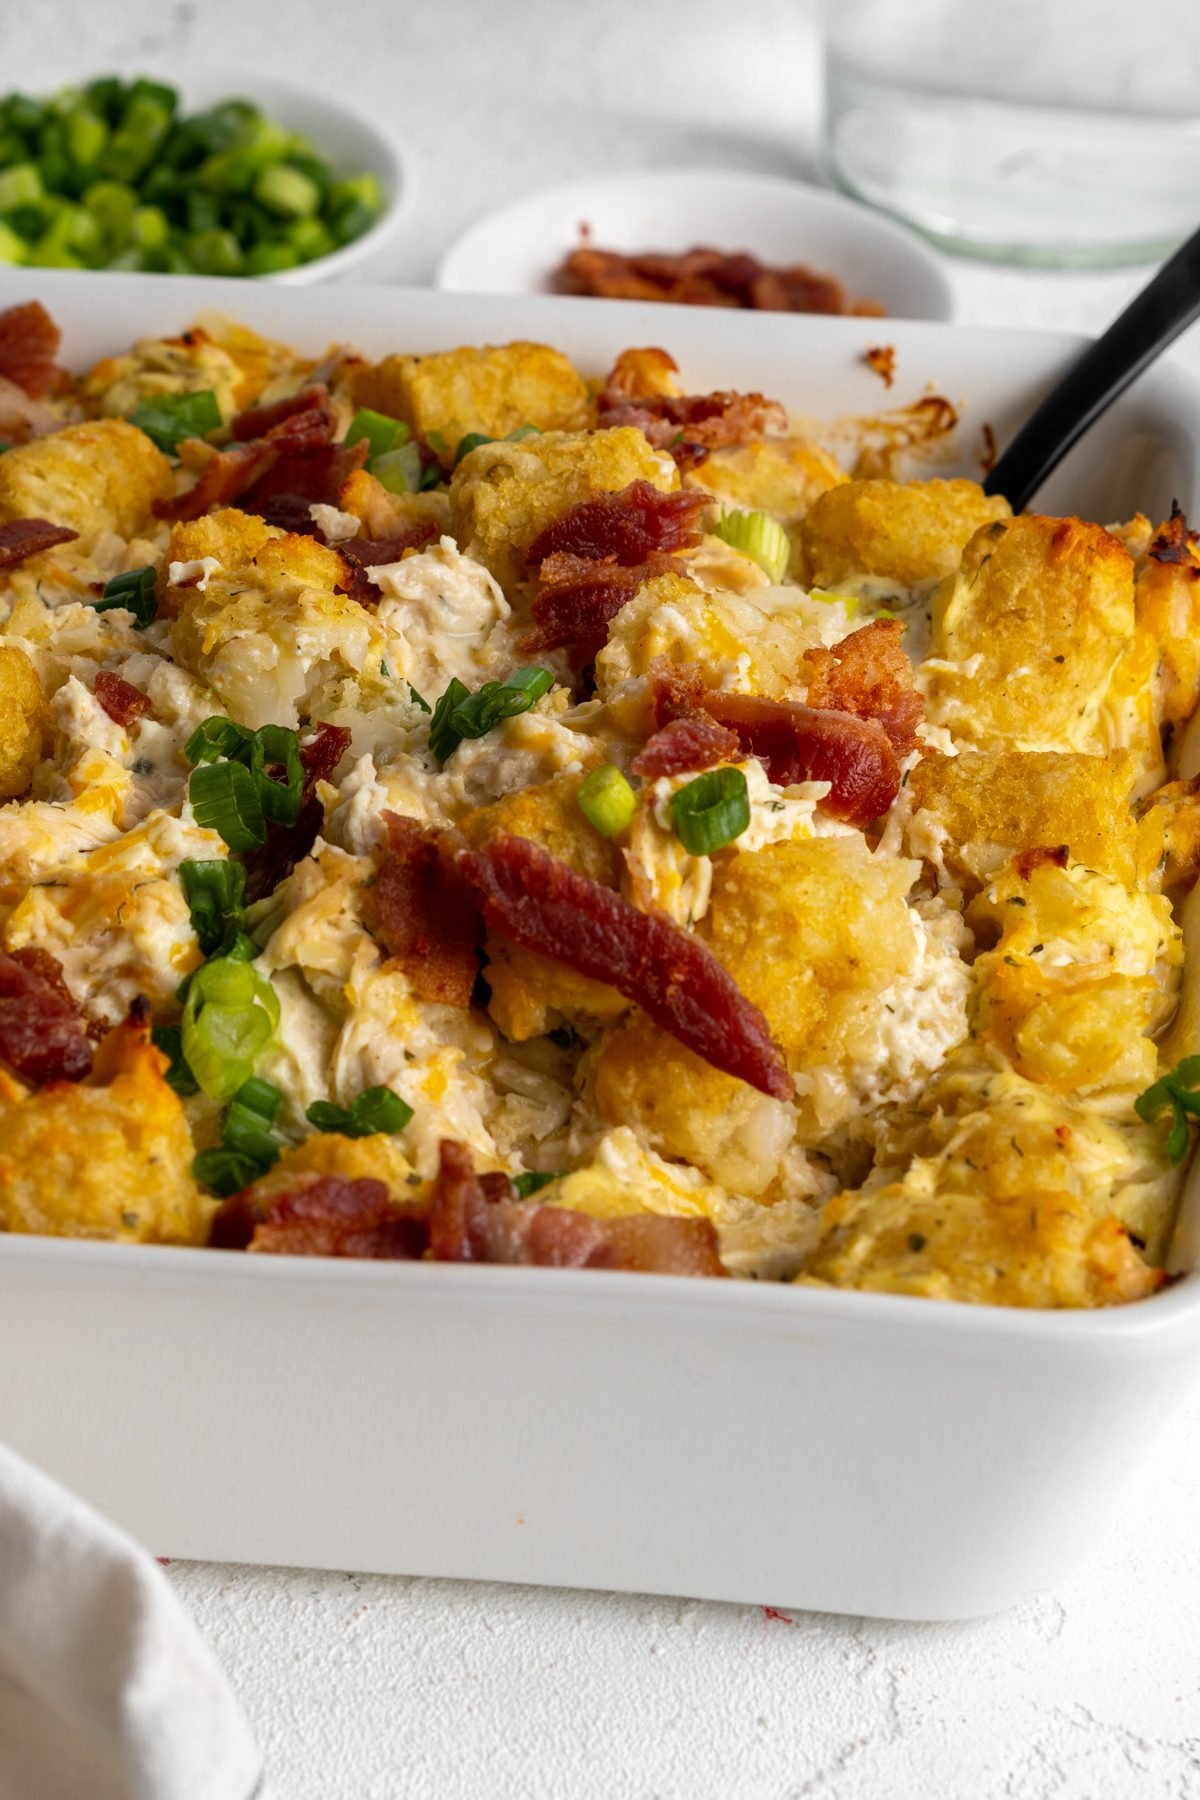 Tater tot casserole topped with bacon and green onion slices.